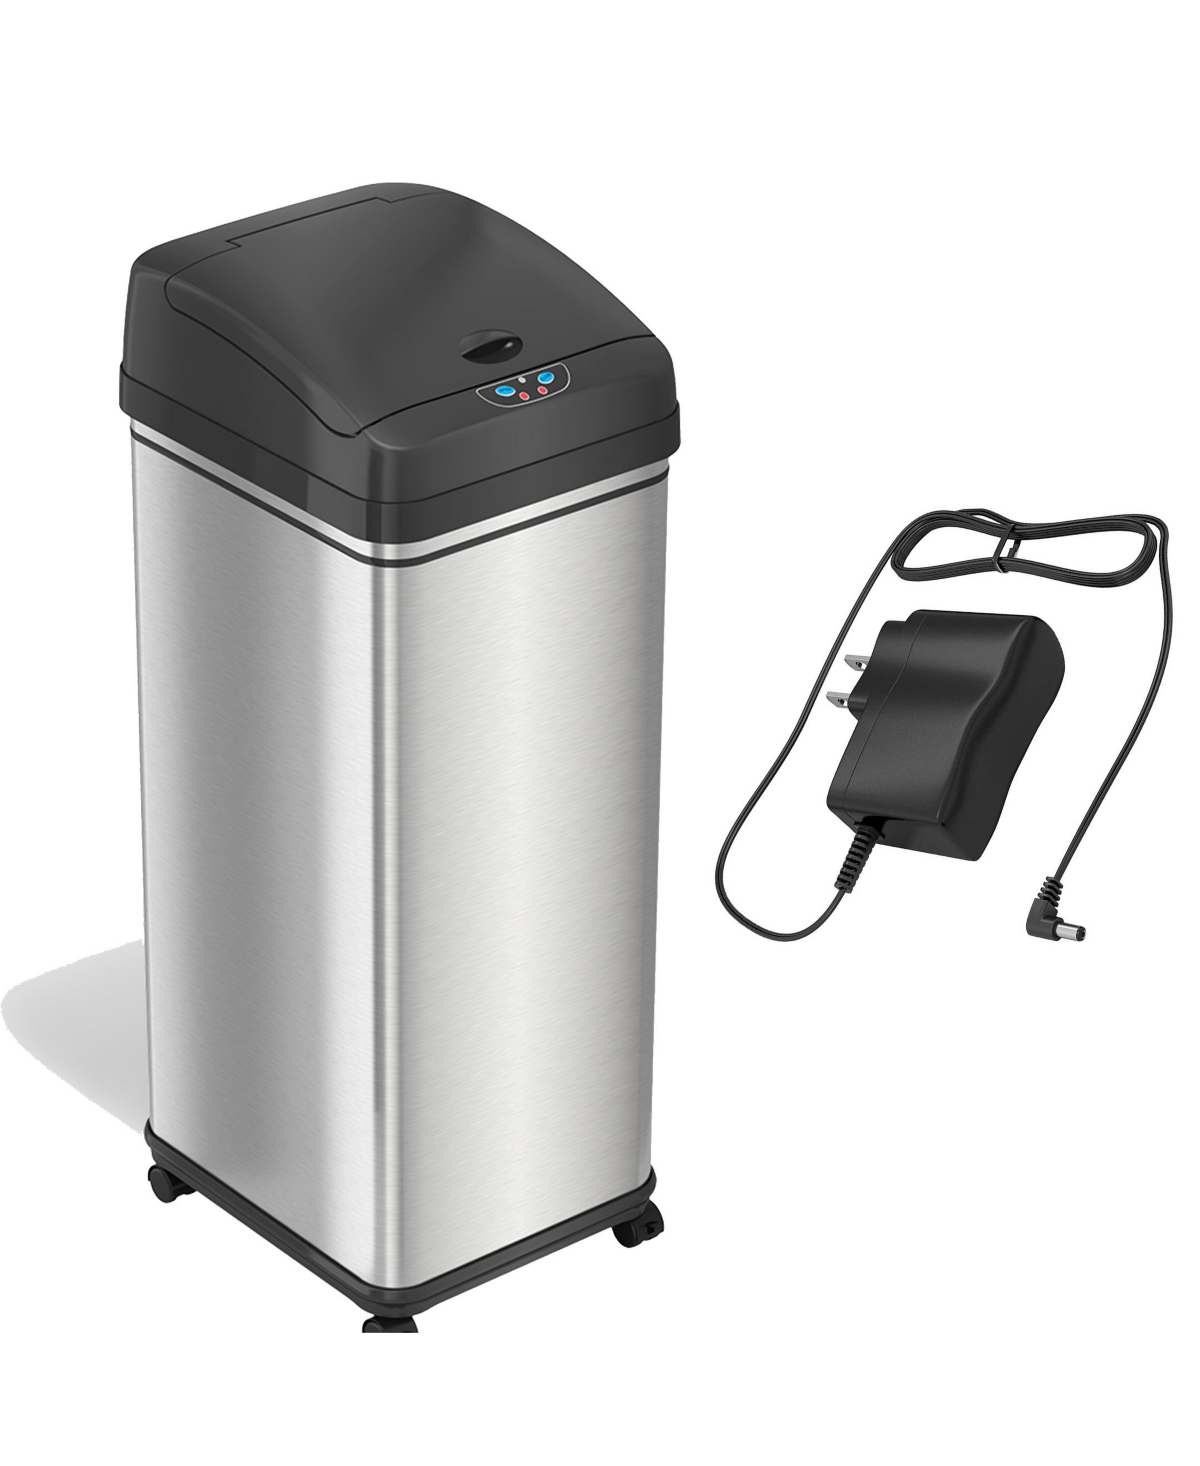 iTouchless 13 Gal Glide Sensor Trash Can with Wheels and Deodorizer - Silver